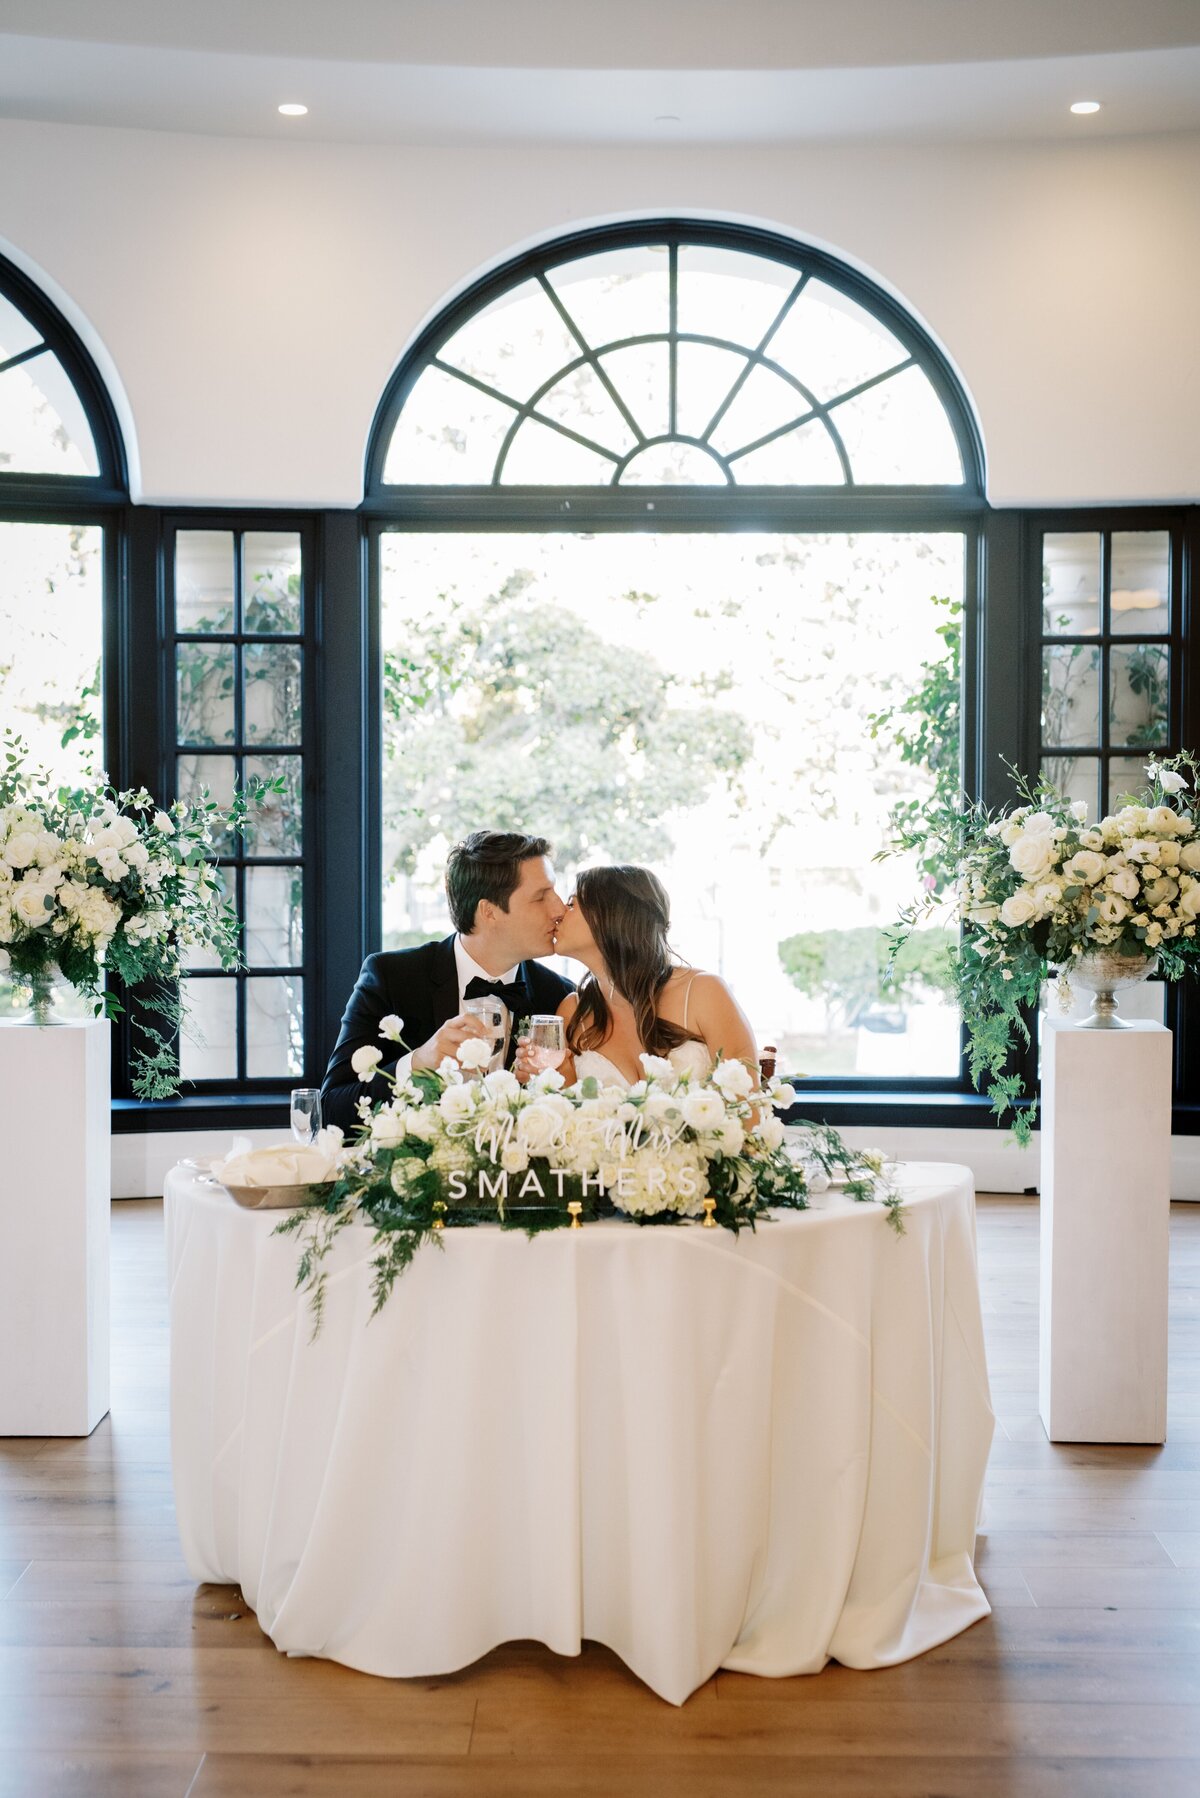 The bridal dining table is framed with large bouquets to make them known during the dinner.